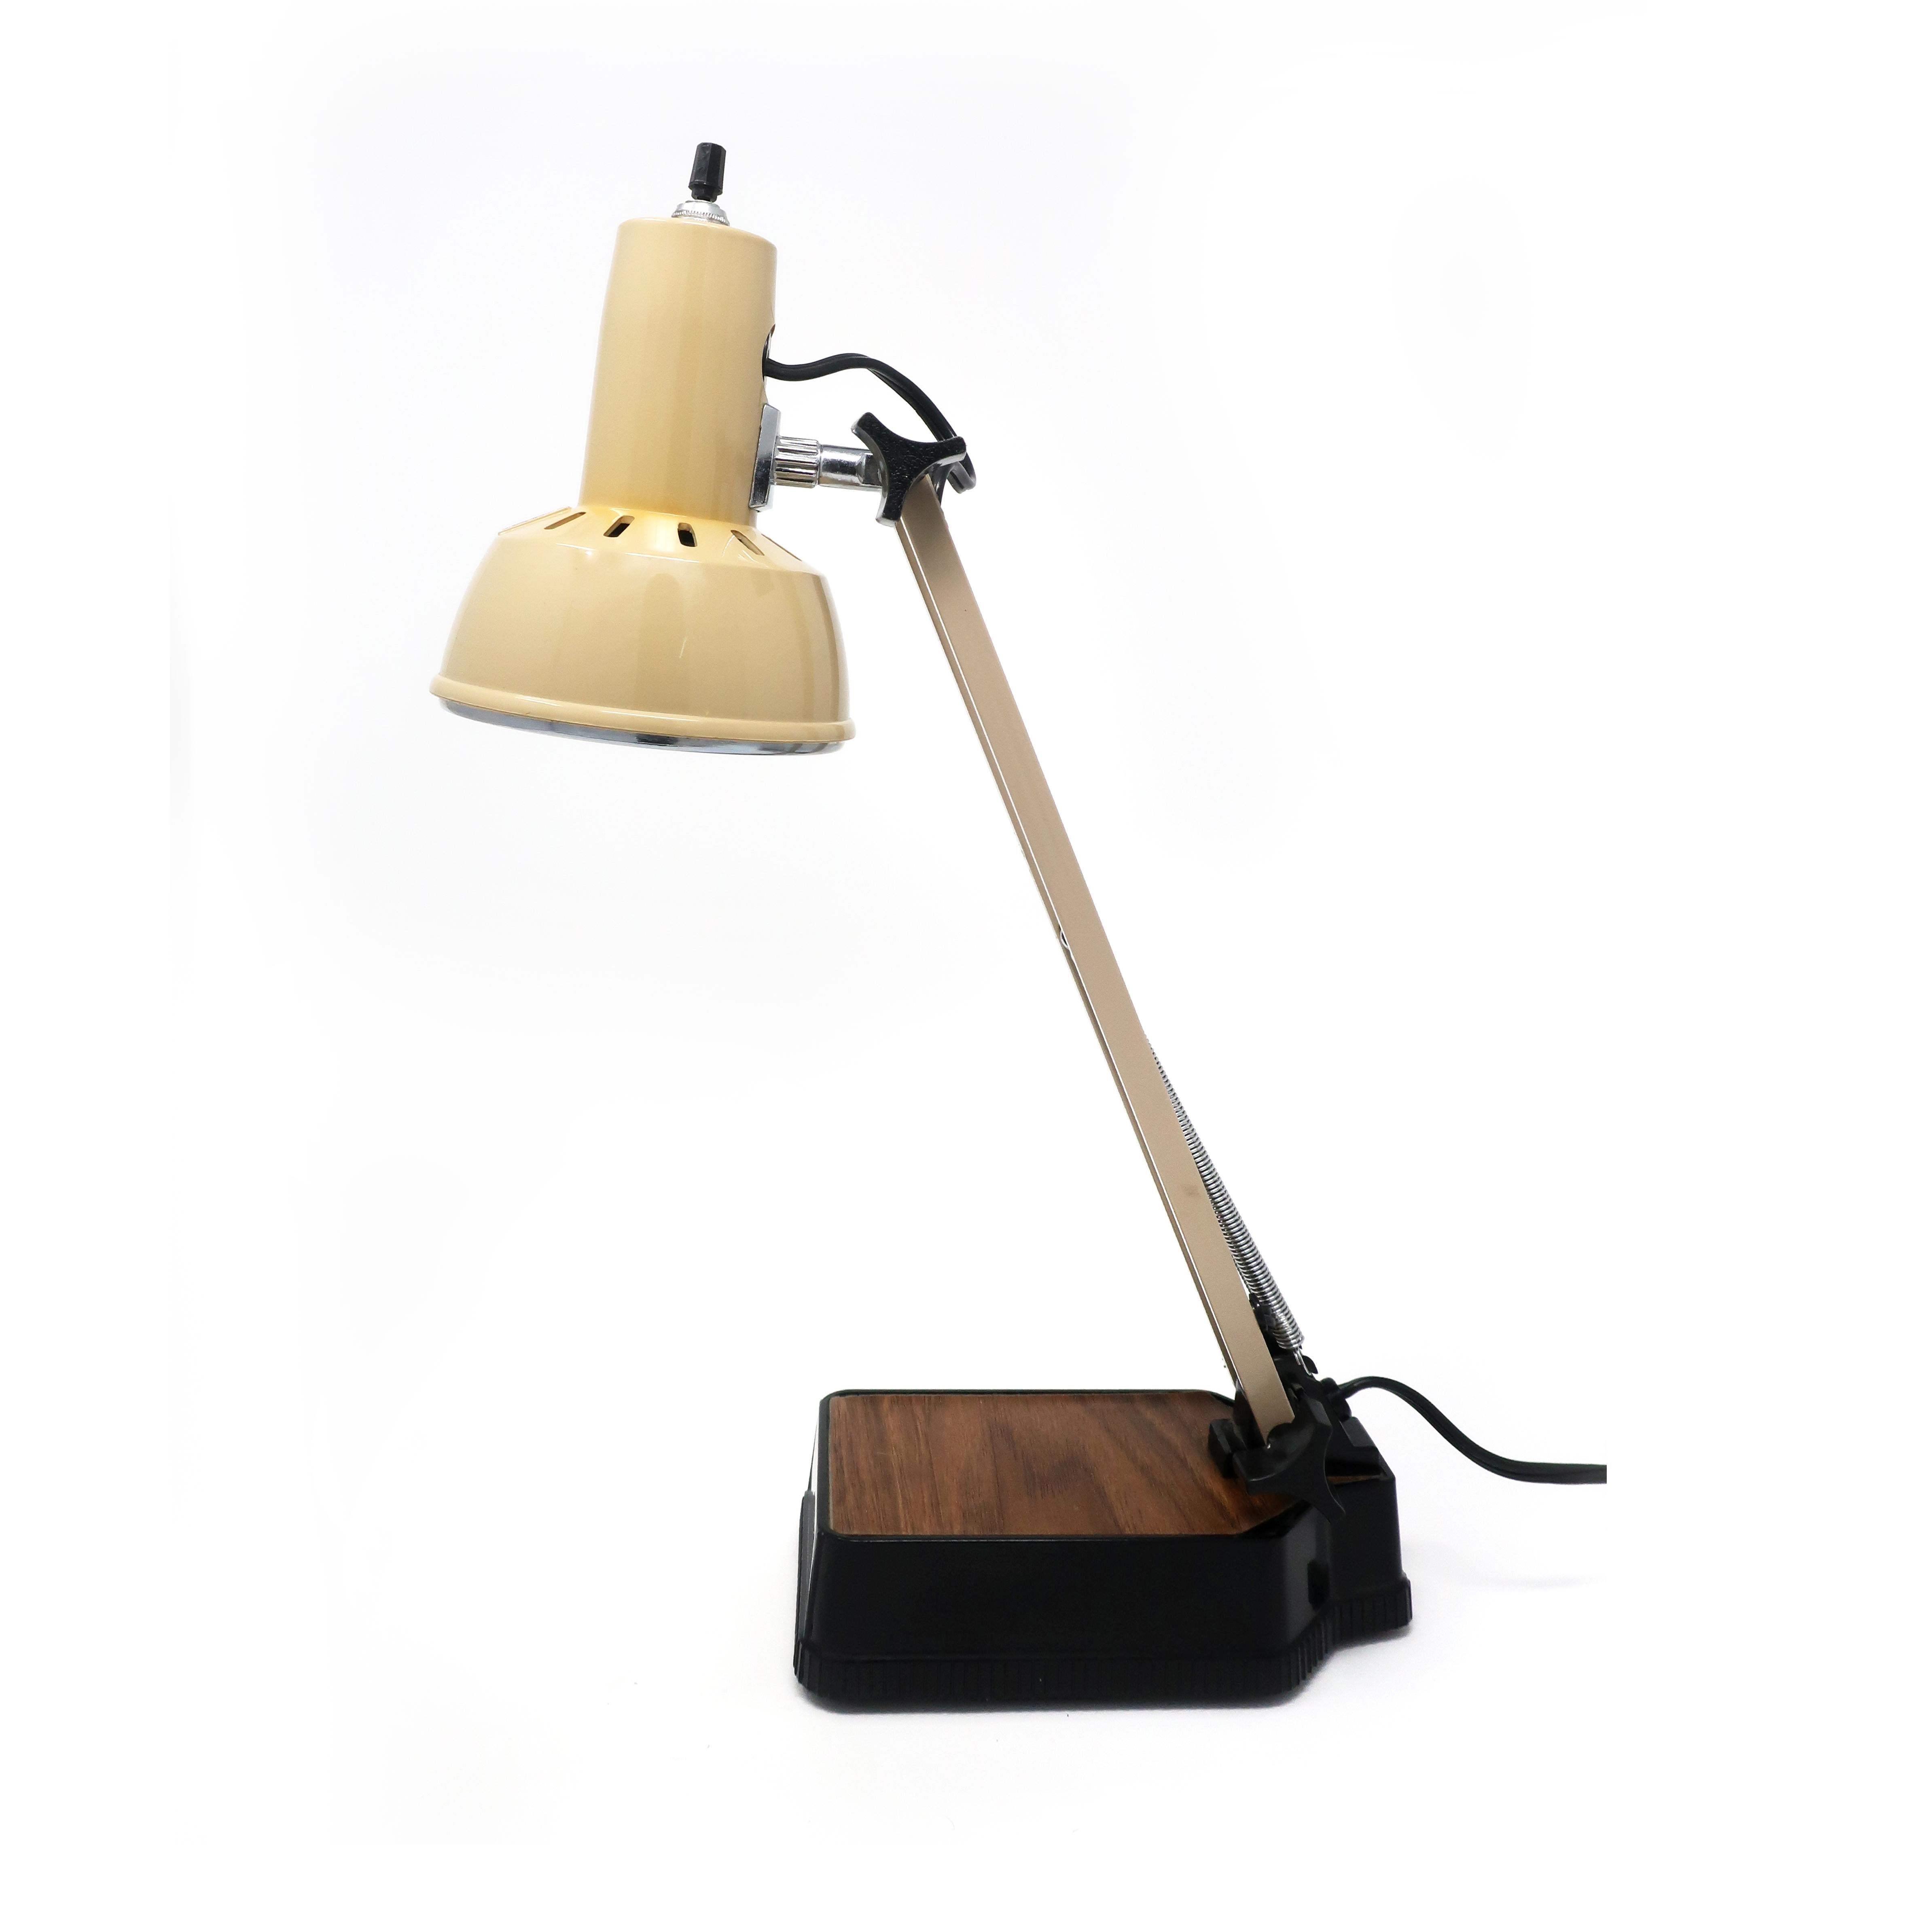 A Mid-Century Modern adjustable desk lamp with black and wood grain base, tan metal stem, and tap plastic shade. Marked “Electric” on shade and on bottom 